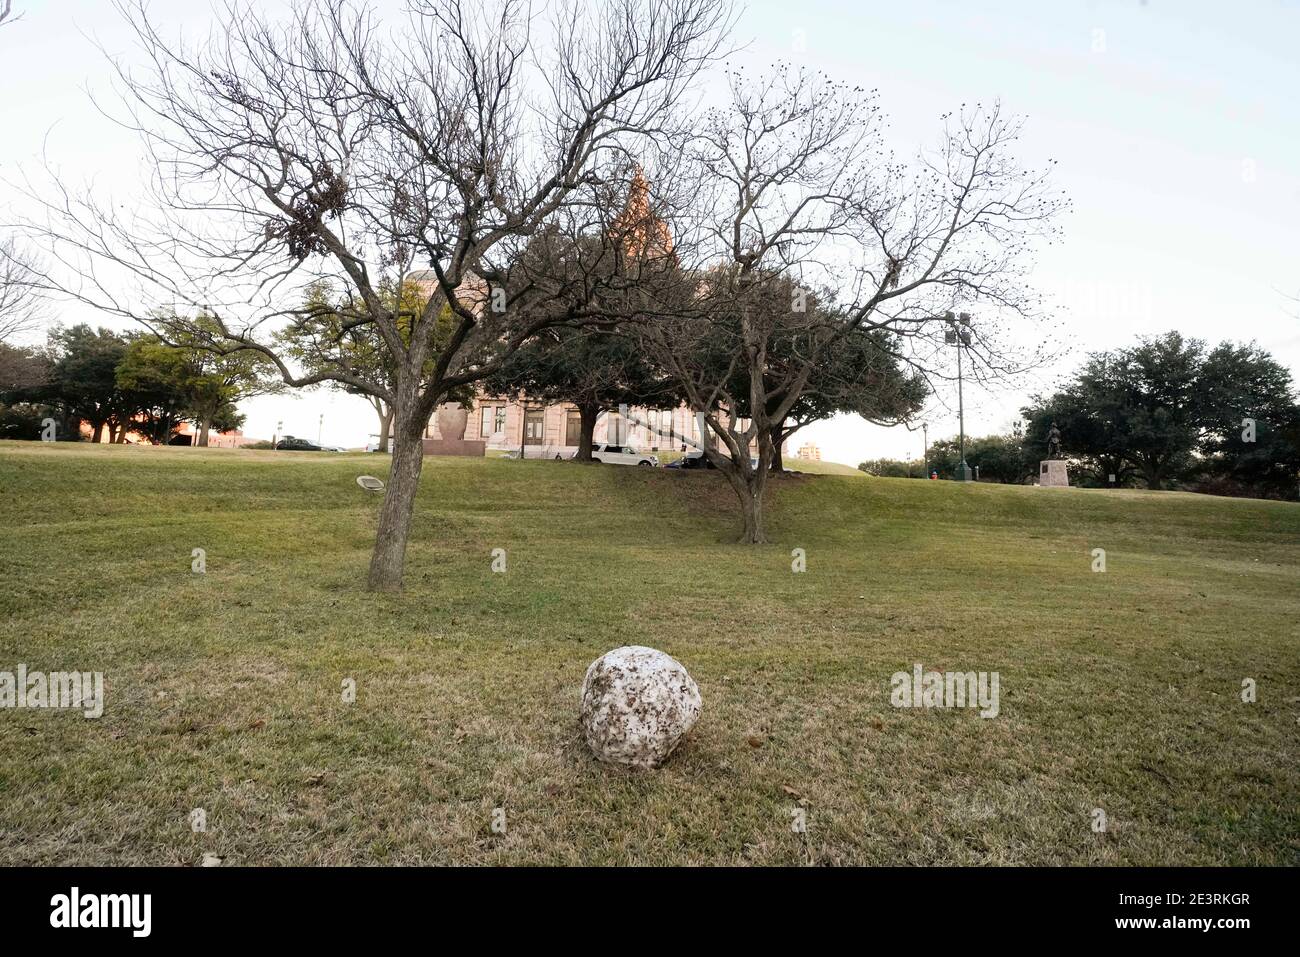 Austin, TX USA January 11, 2021:  A rare snowball slowly melts on the west lawn at the Texas Capitol the day after a freak snowstorm hits just prior to the 87th Legislature session of 2021. The two-foot thick snowball was probably made by a tourist reveling in a rare Austin snow event earlier in the week. ©Bob Daemmrich Stock Photo